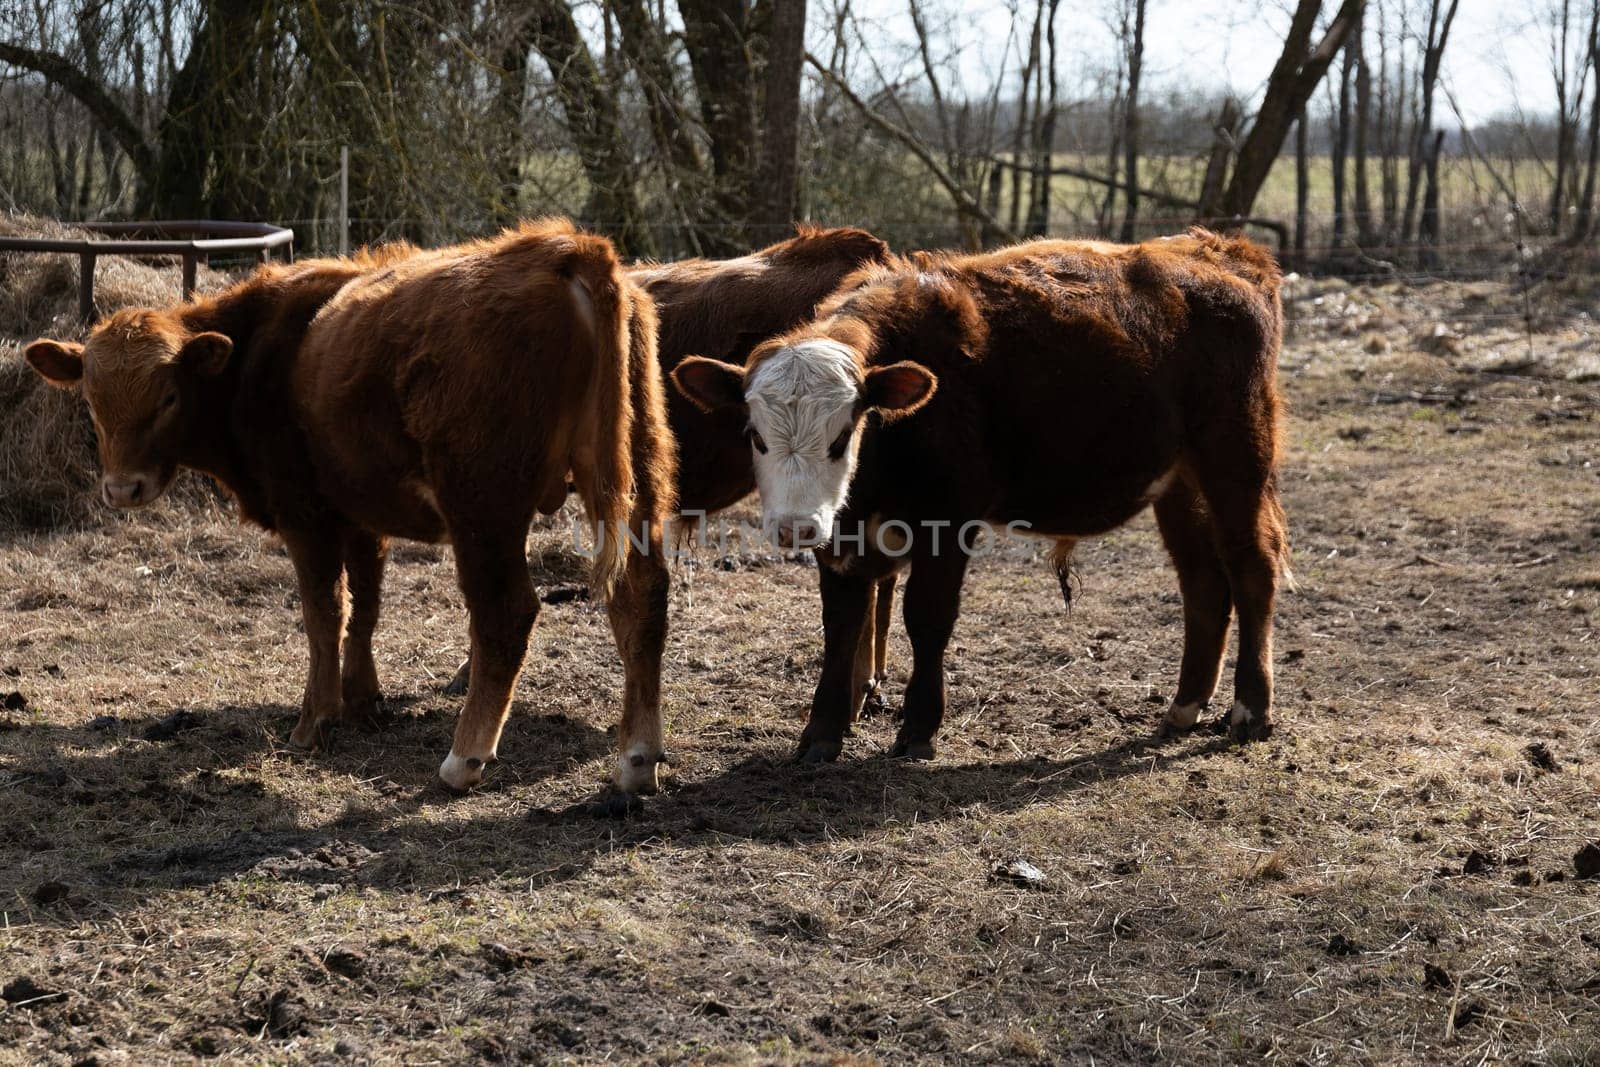 Two brown cows are standing on top of a dry grass field. The cows are grazing and moving around in the open field under the clear sky.